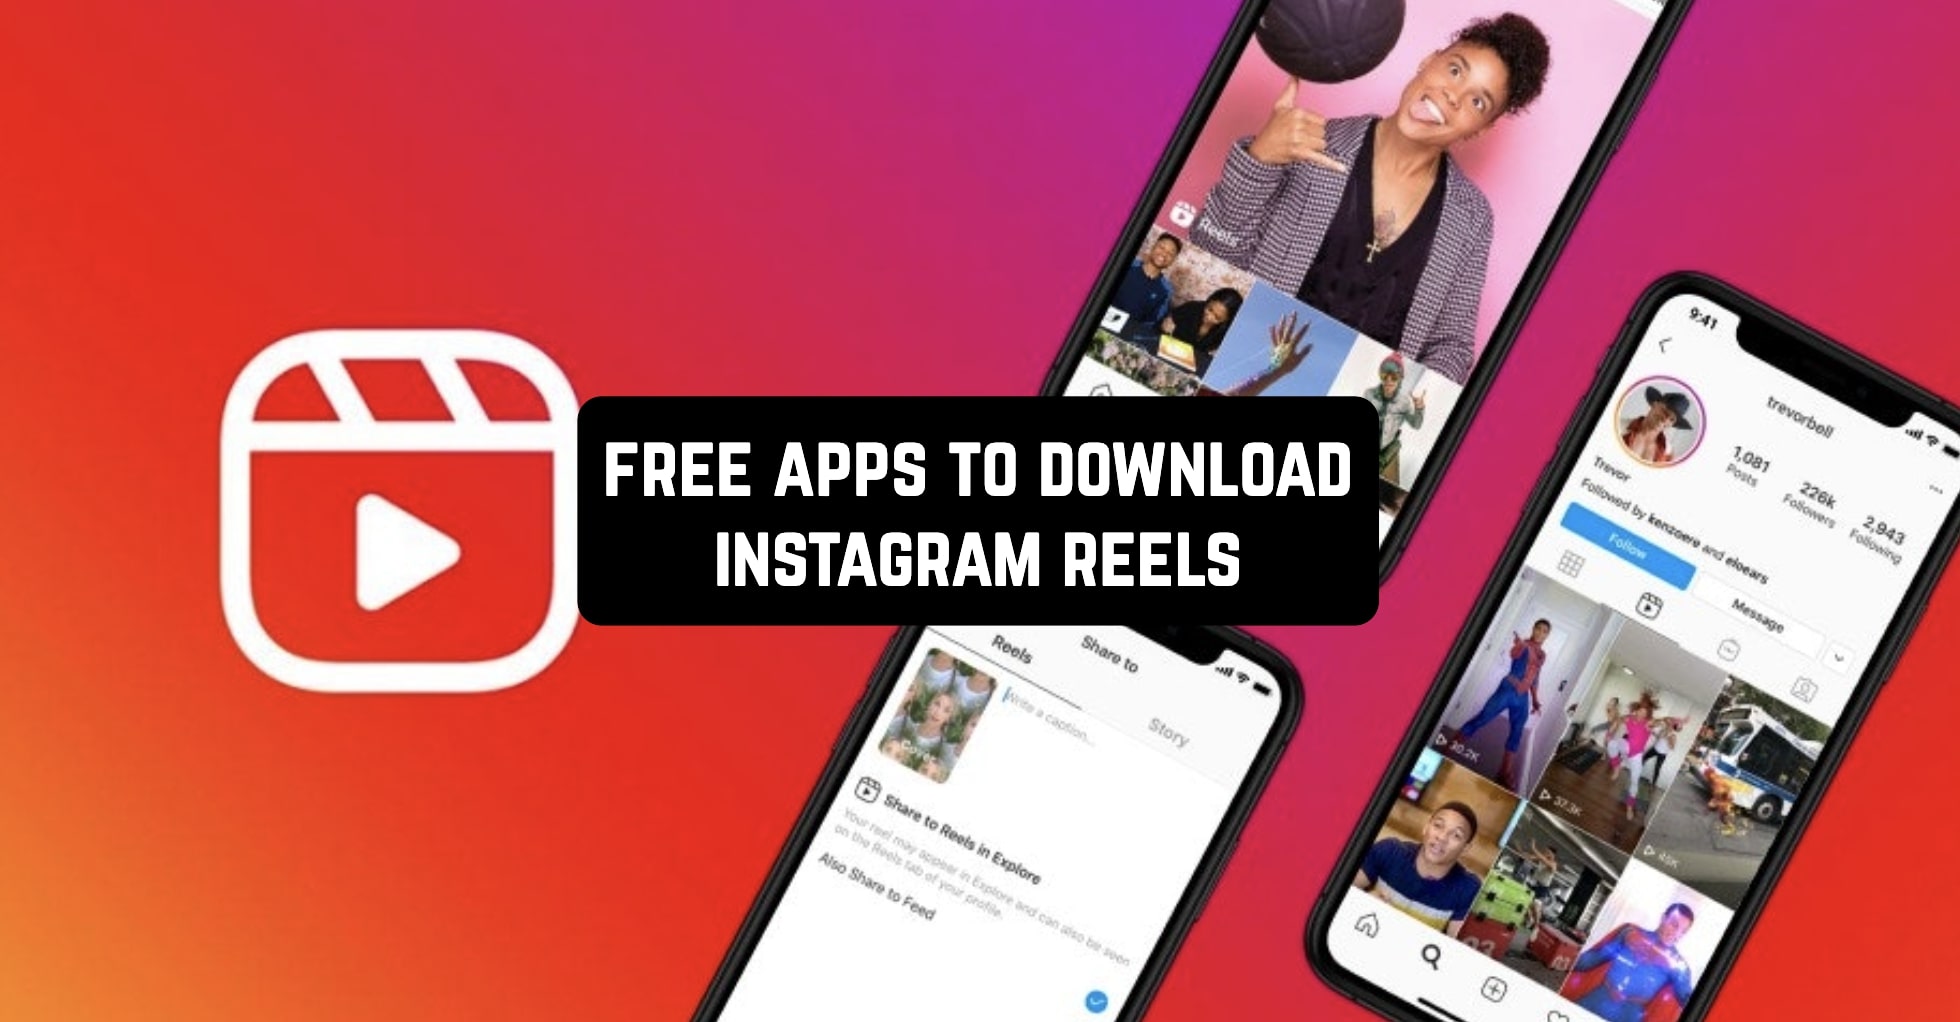 7-Free-Apps-To-Download-Instagram-Reels-2022-Android-iPhone